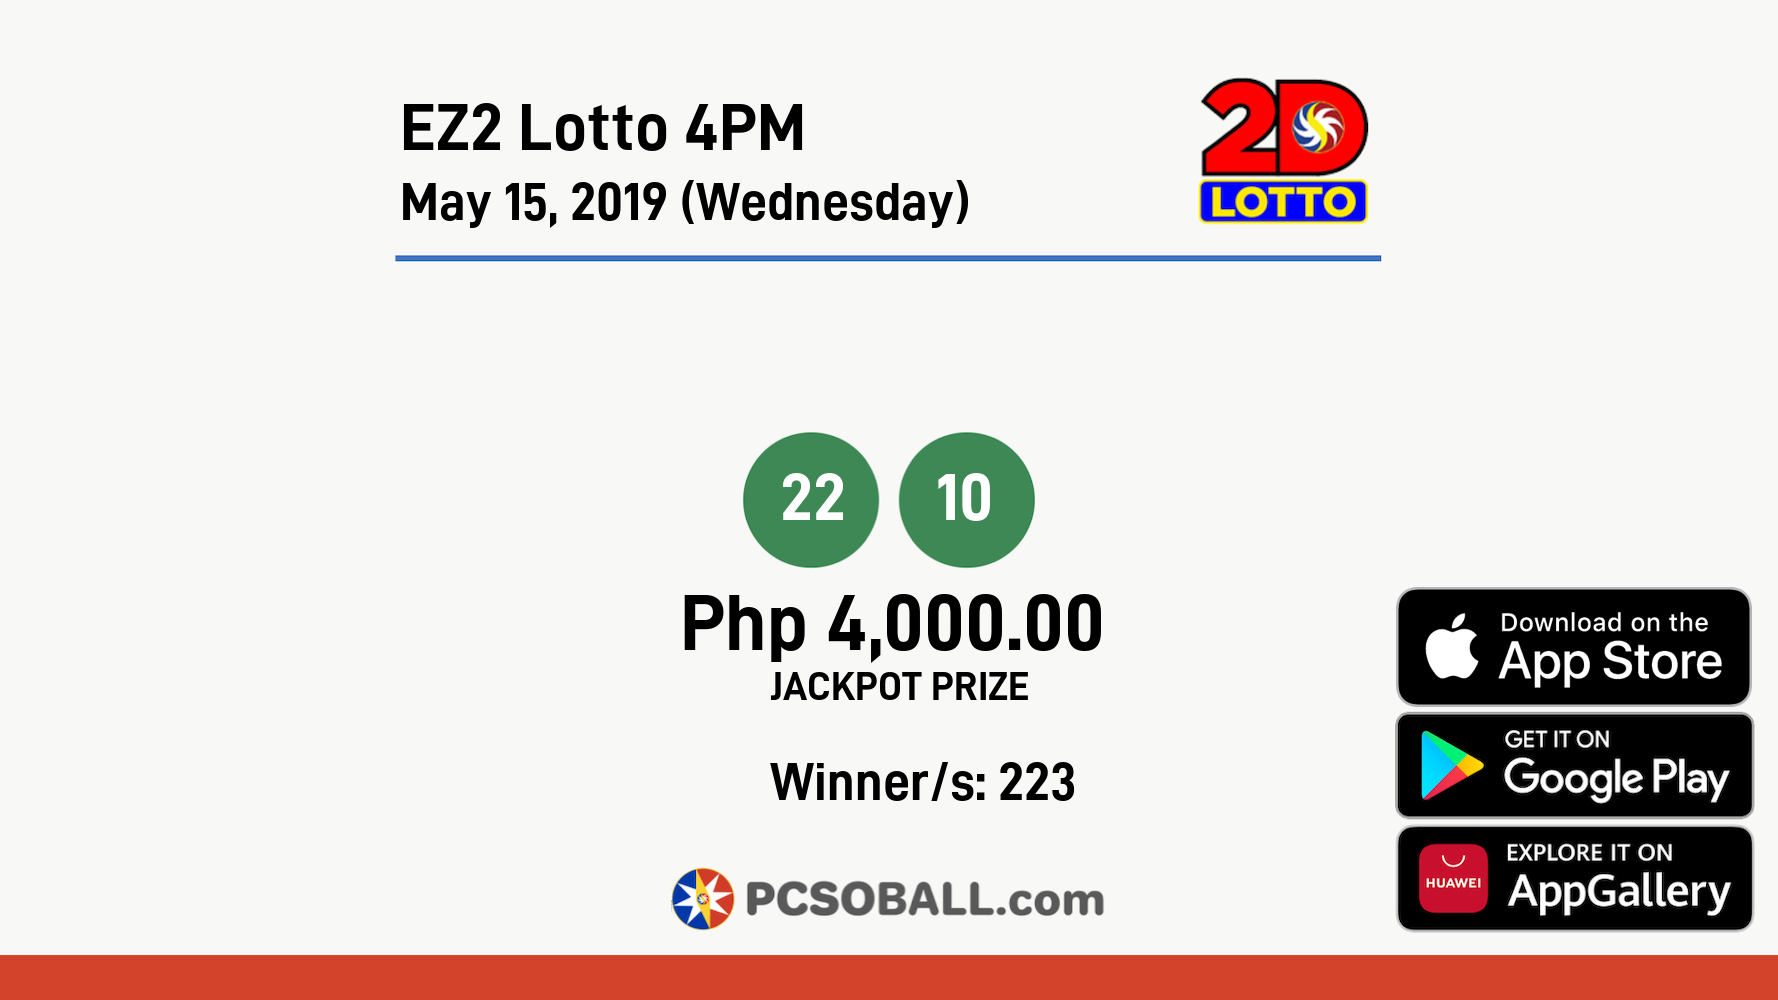 EZ2 Lotto 4PM May 15, 2019 (Wednesday) Result